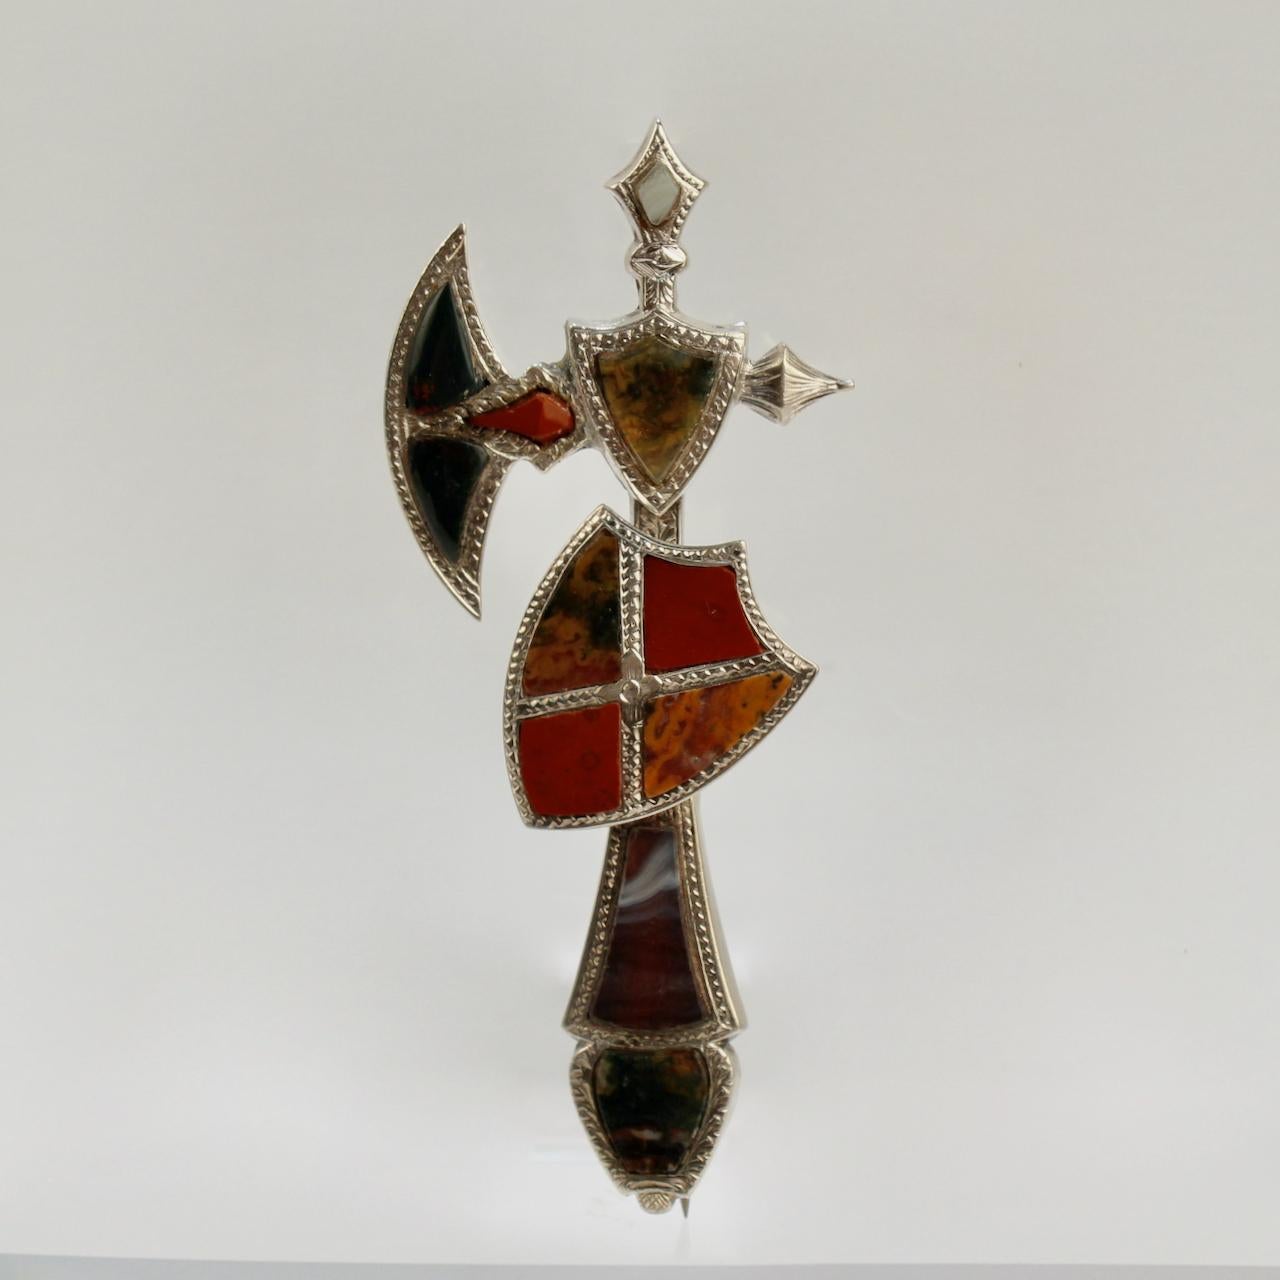 A very fine Victorian Scottish agate brooch in the shape of a battle axe and shield.

With a variety of shaped agate specimens set in sterling silver.  

An amazing piece of Scottish Victoriana!

Date:
19th Century

Overall Condition:
It is in